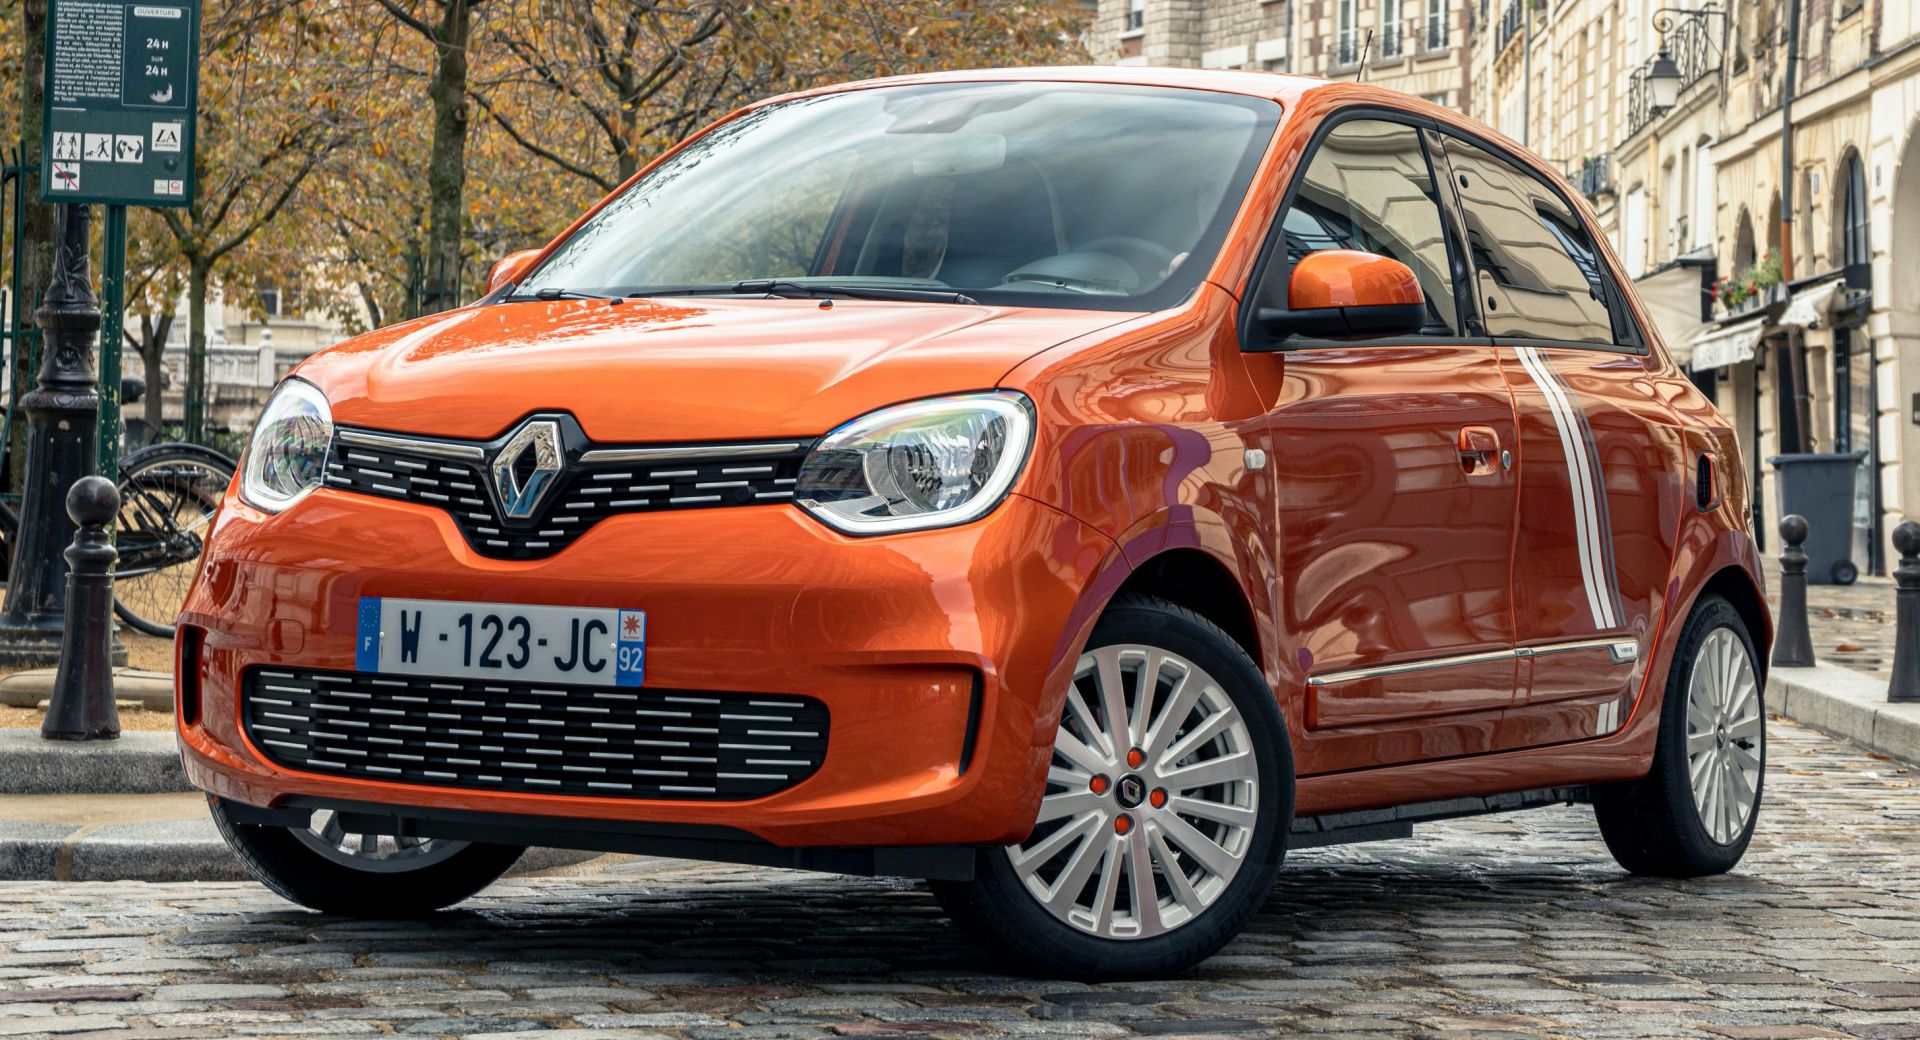 2021 Renault Twingo Electric Detailed, Offers Longer Range Than